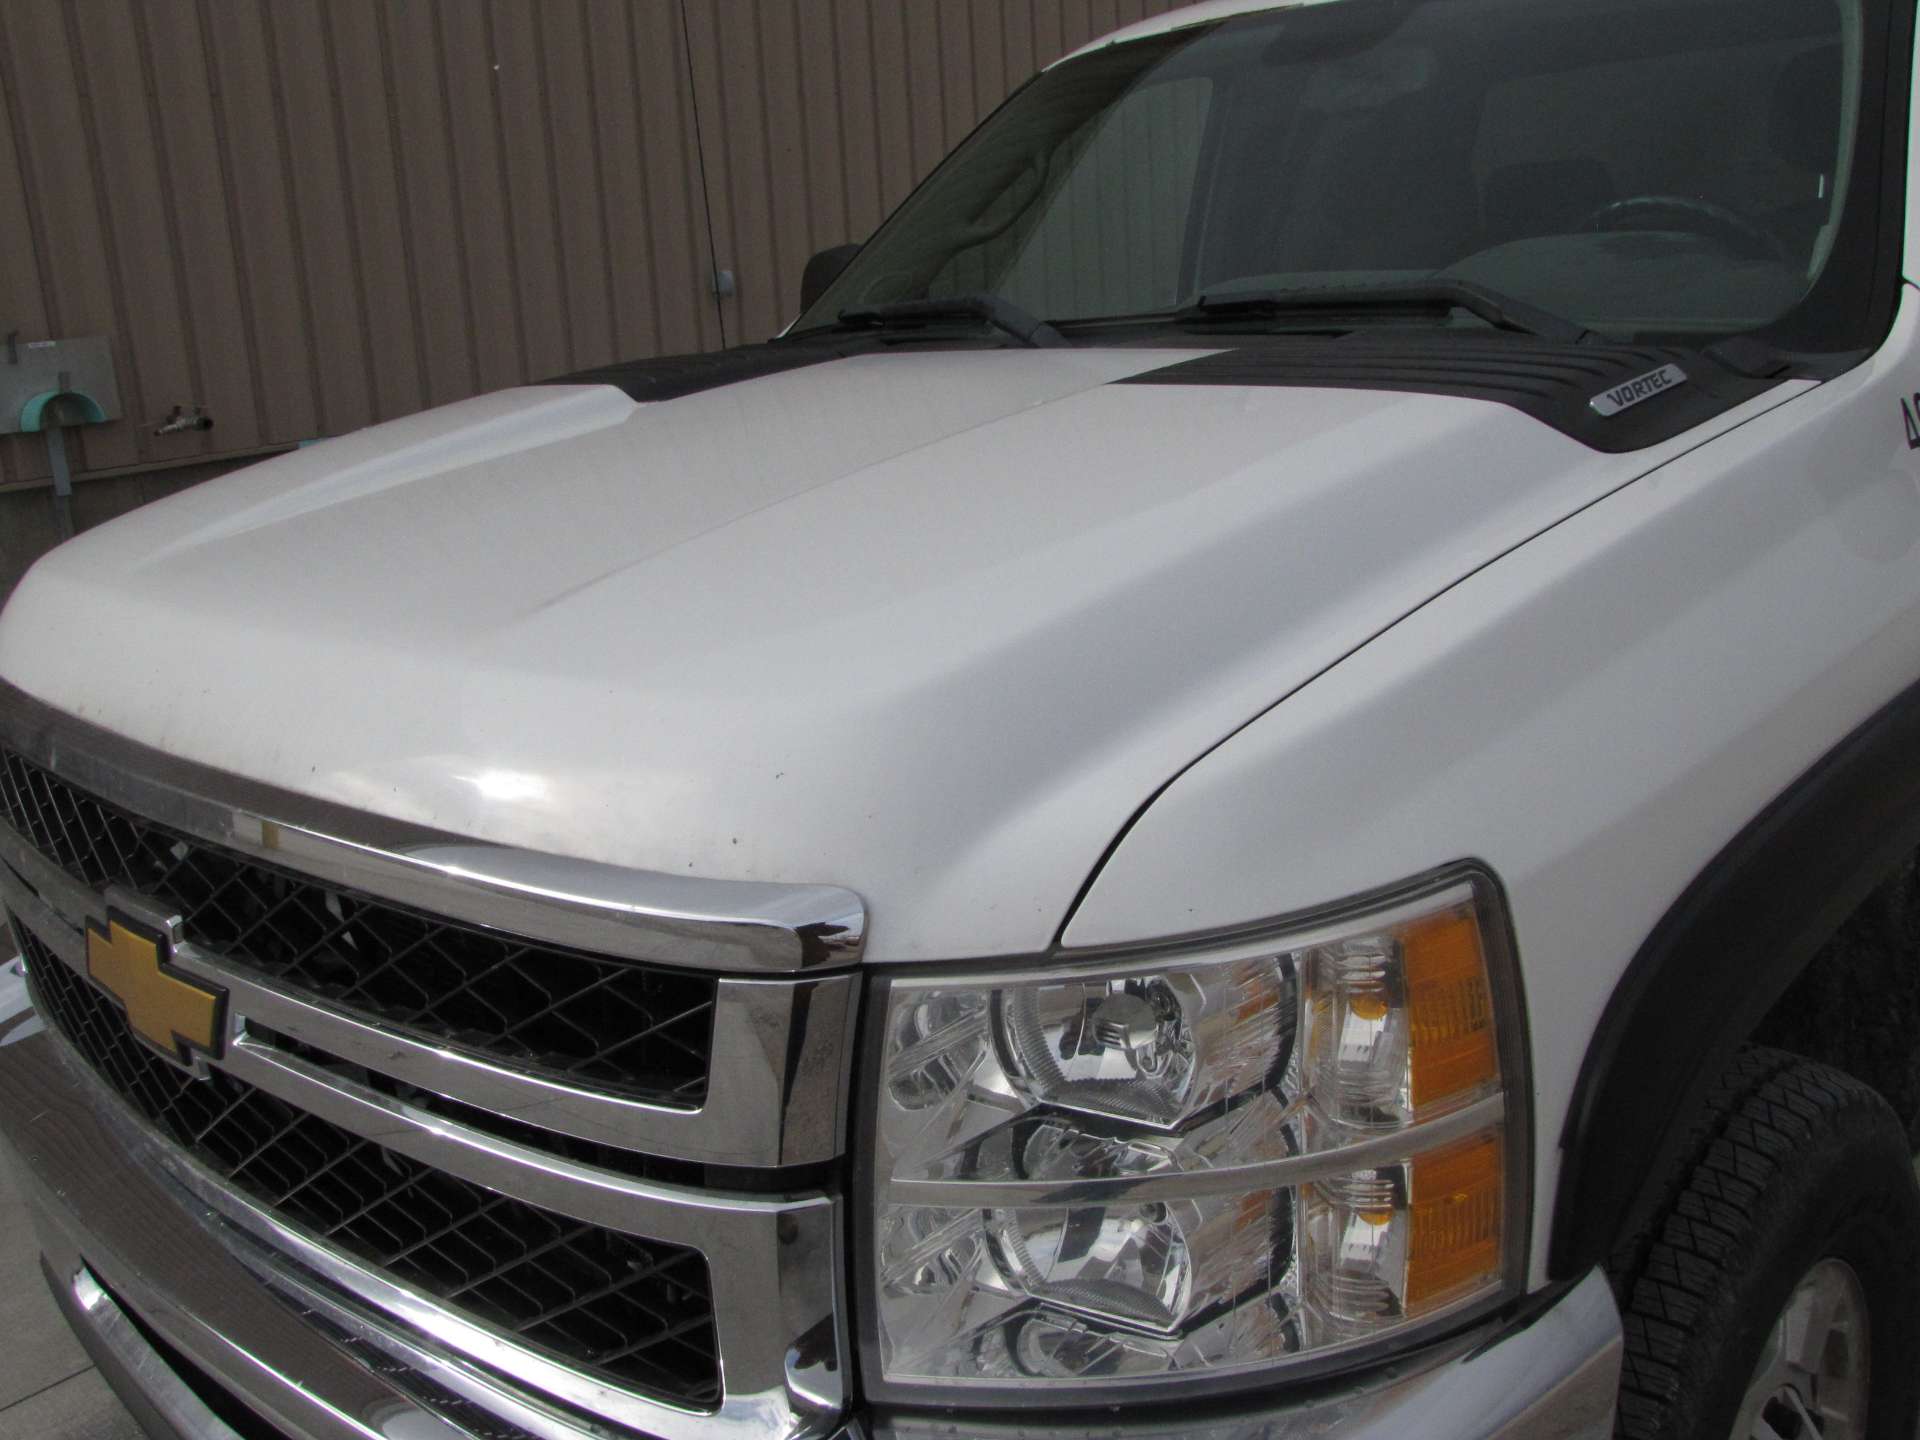 2012 Chevy 2500 HD pickup truck - Image 17 of 57